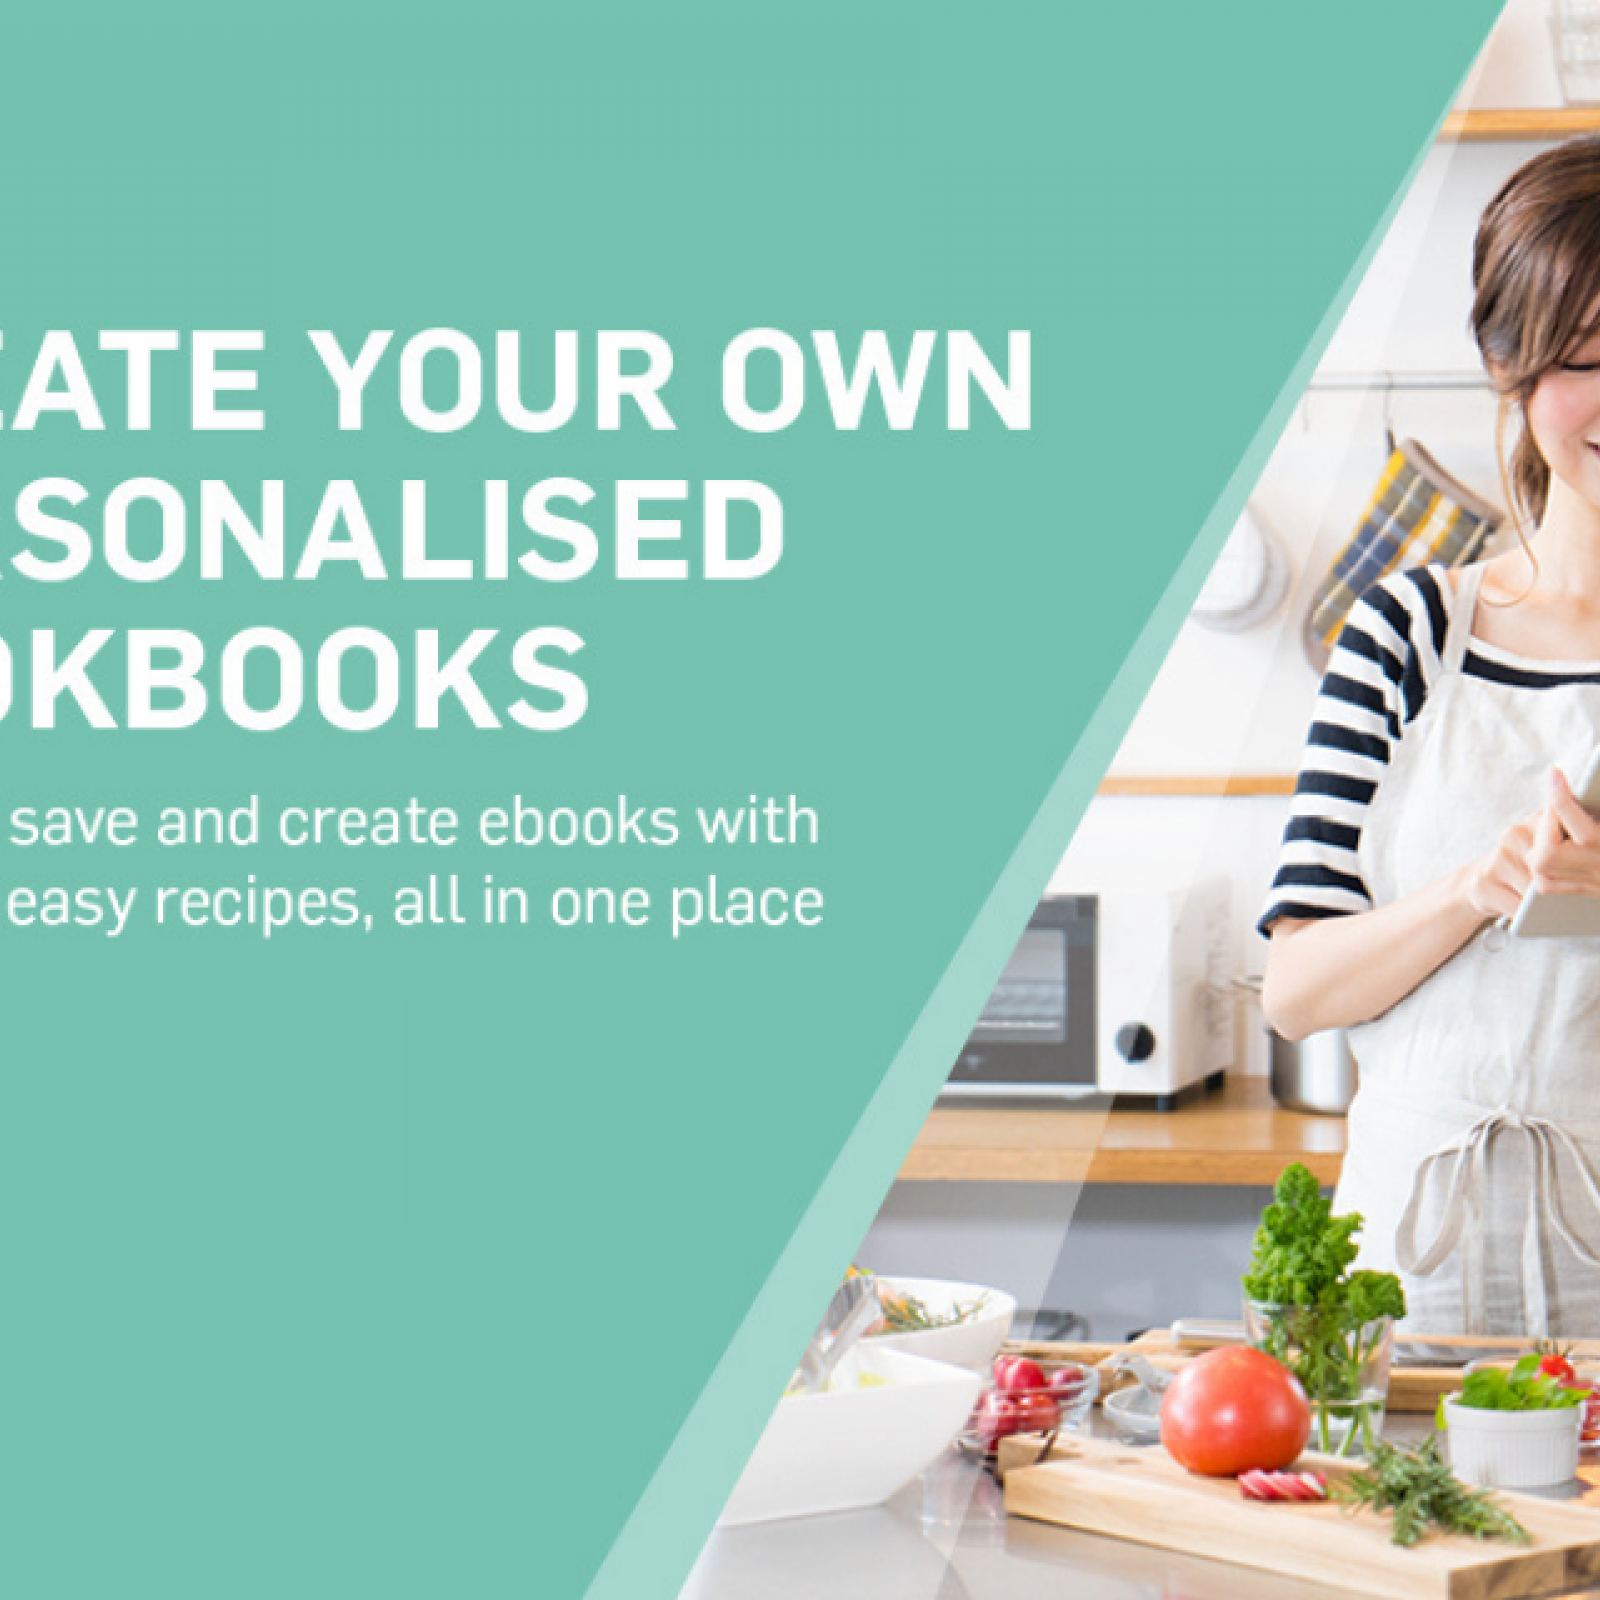 https://myfoodbook.com.au/sites/default/files/styles/1x1/public/collections_image/2022_carousel_promo_create_your_own_cookbooks.png